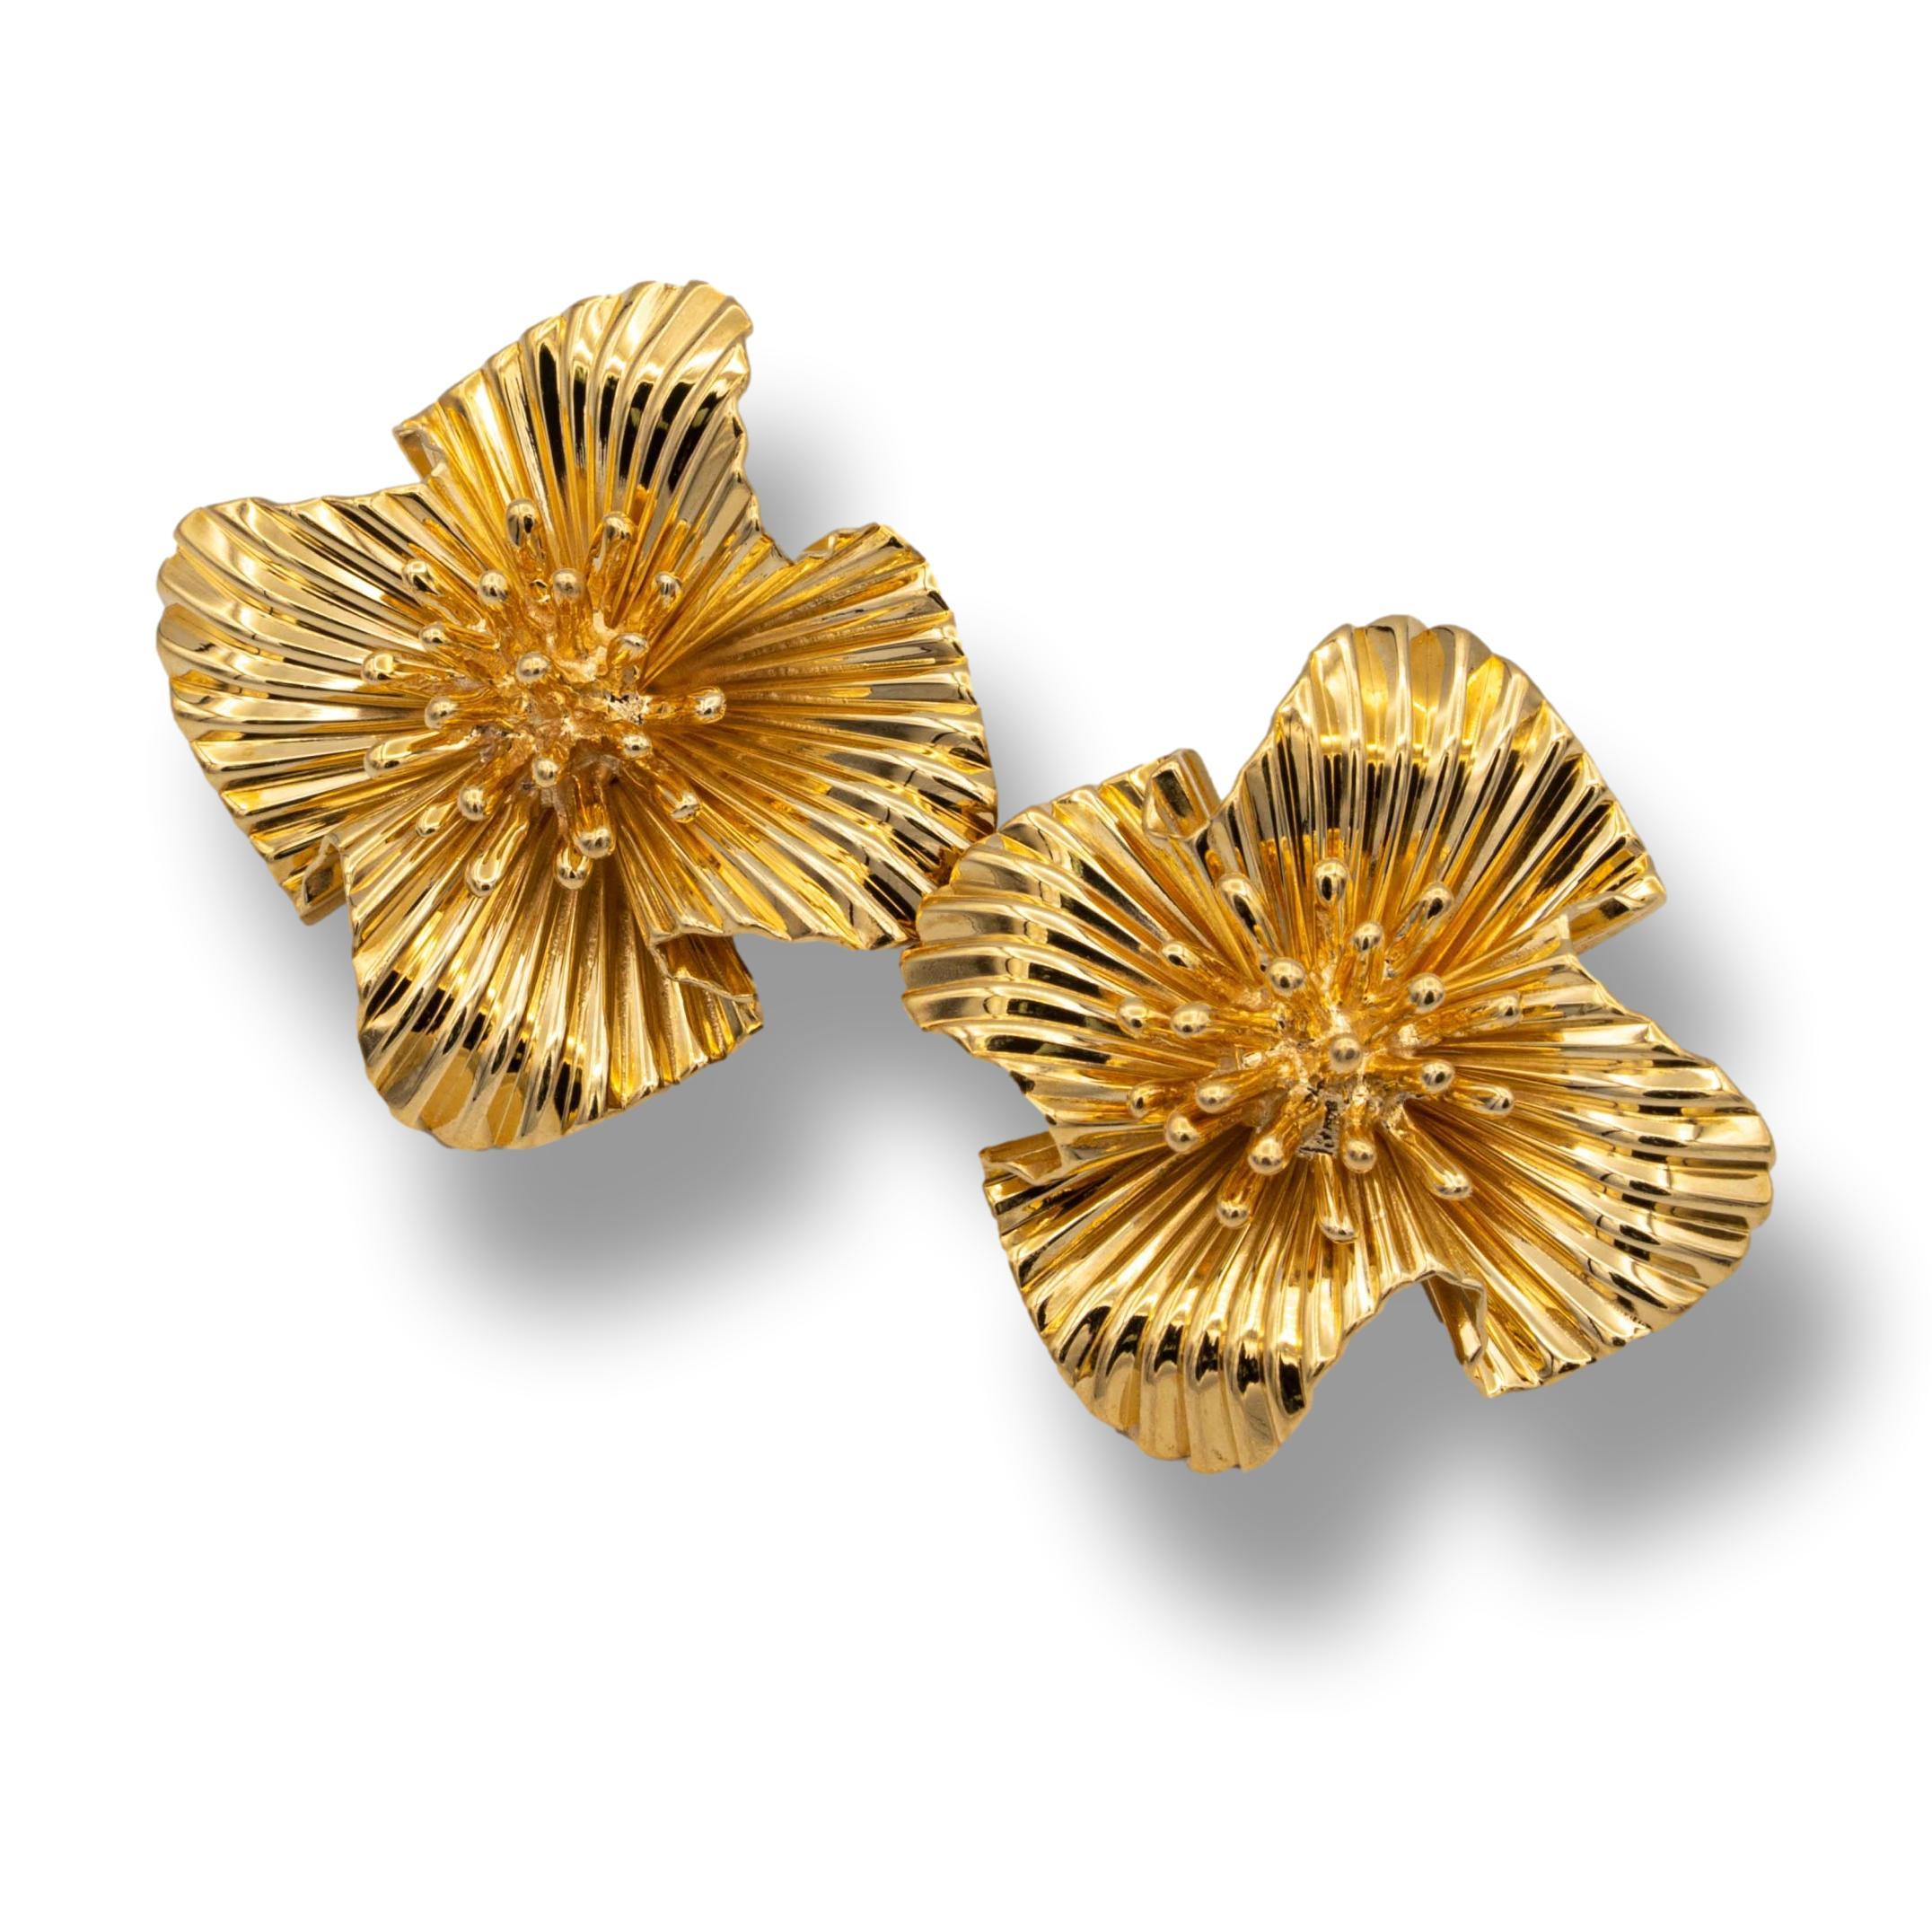 Tiffany & Co vintage flower clip-on earrings finely crafted in 14 karat yellow gold with large omega backs. Circa 1950's.   These earrings have been in a safe deposit box since 1959.

Brand: Tiffany & Co.

Hallmarks: Tiffany & Co. 14K Pat.